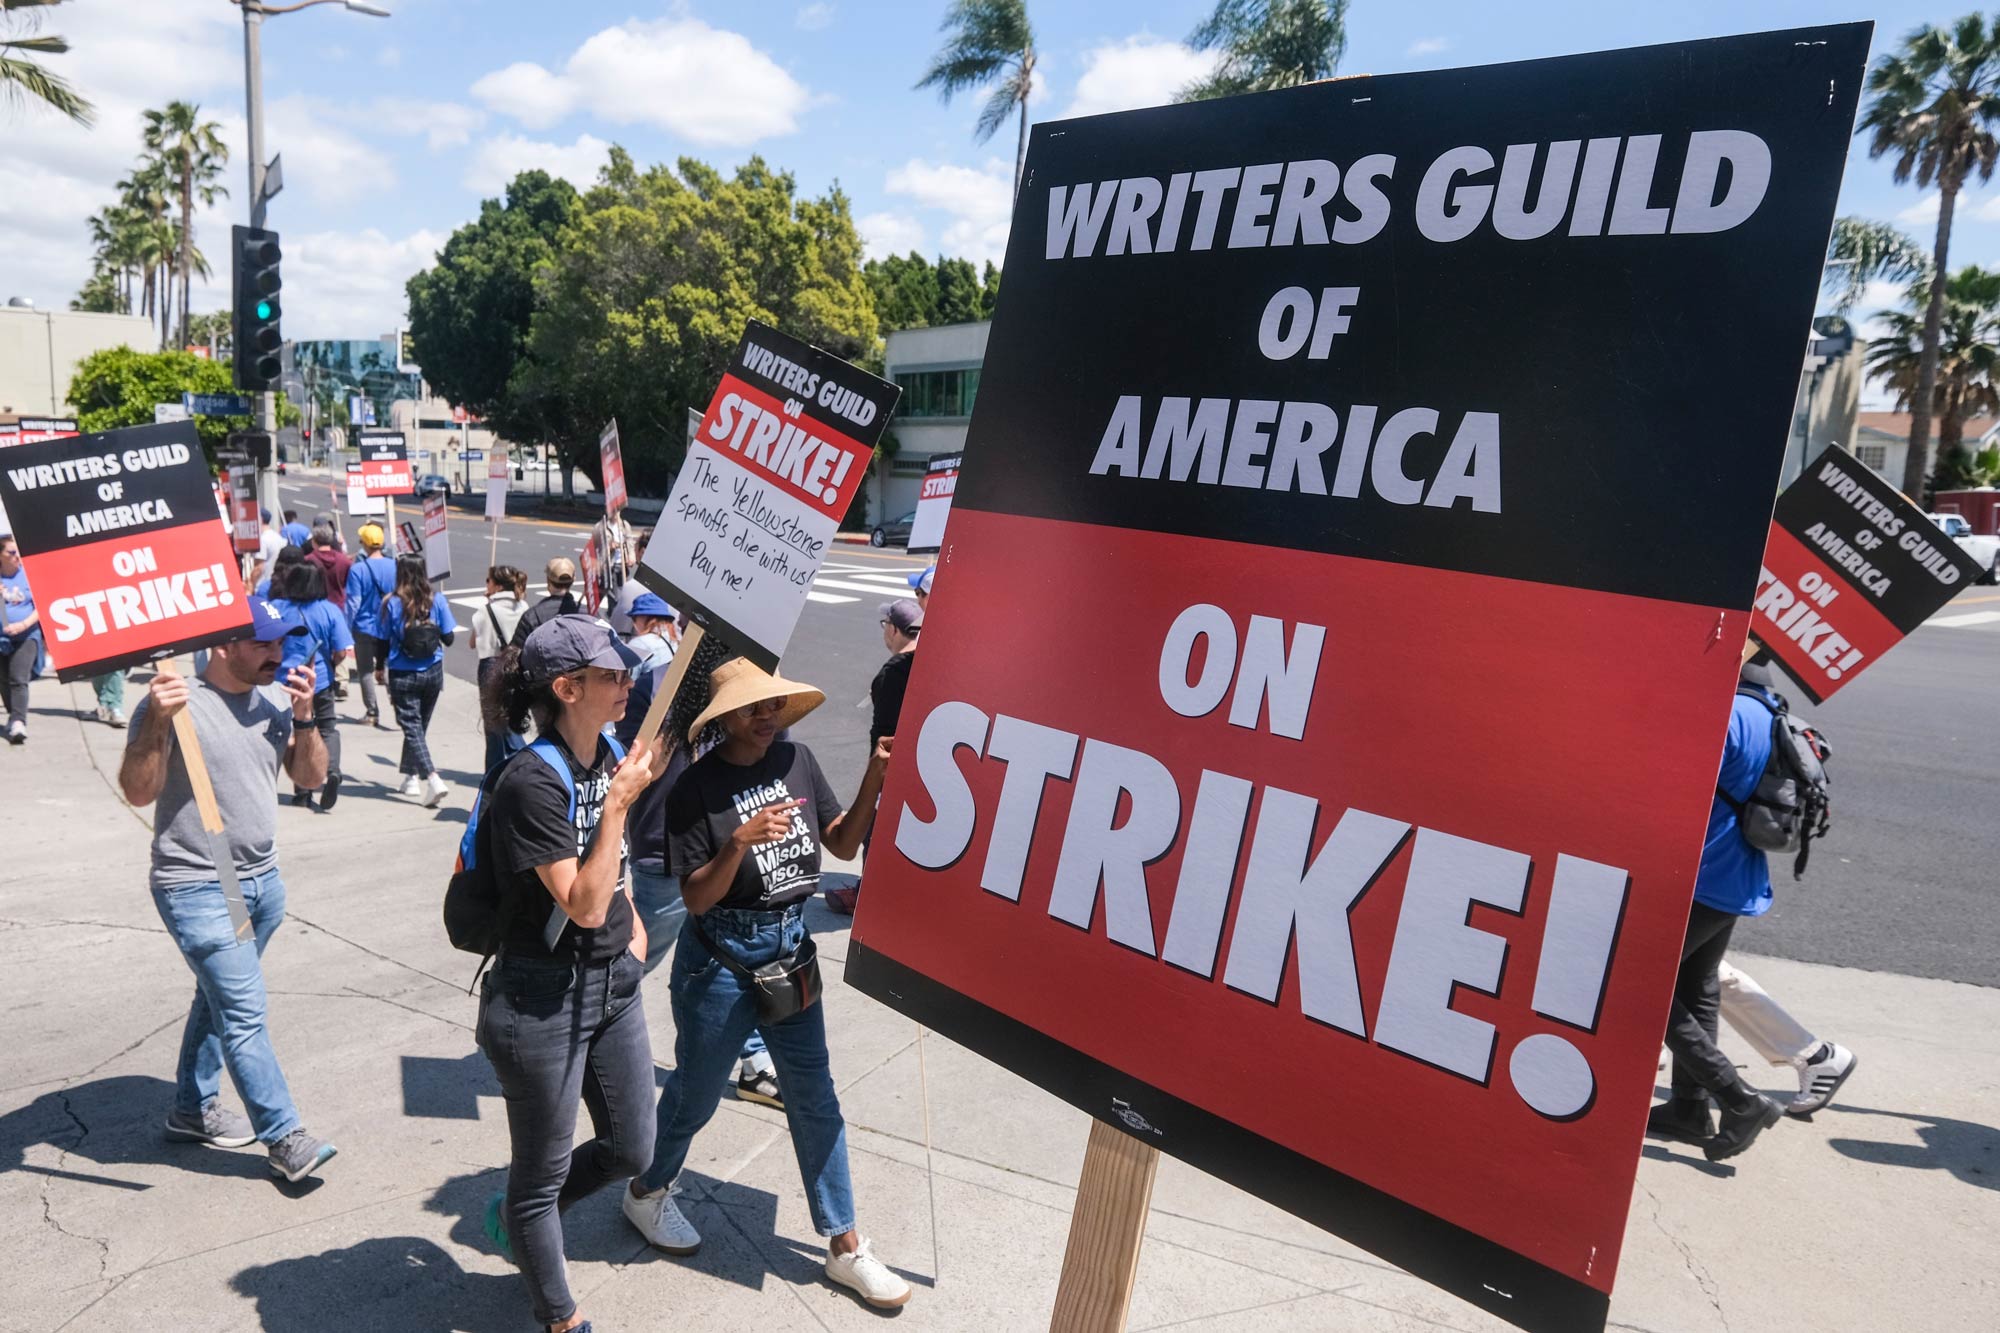 How will the American writers’ strike impact the Australian entertainment industry?